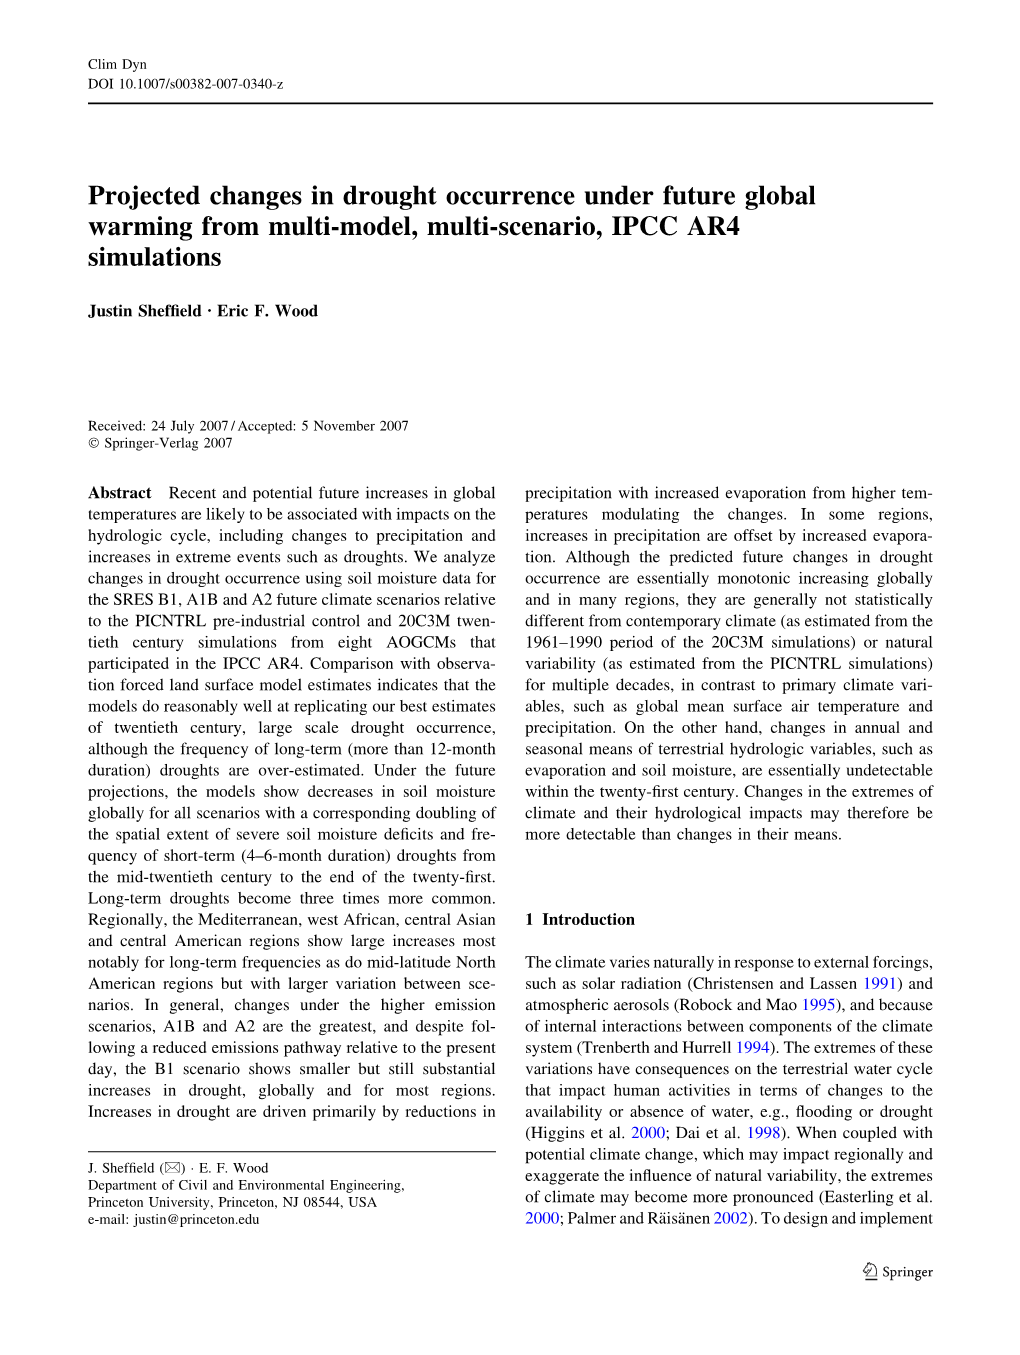 Projected Changes in Drought Occurrence Under Future Global Warming from Multi-Model, Multi-Scenario, IPCC AR4 Simulations